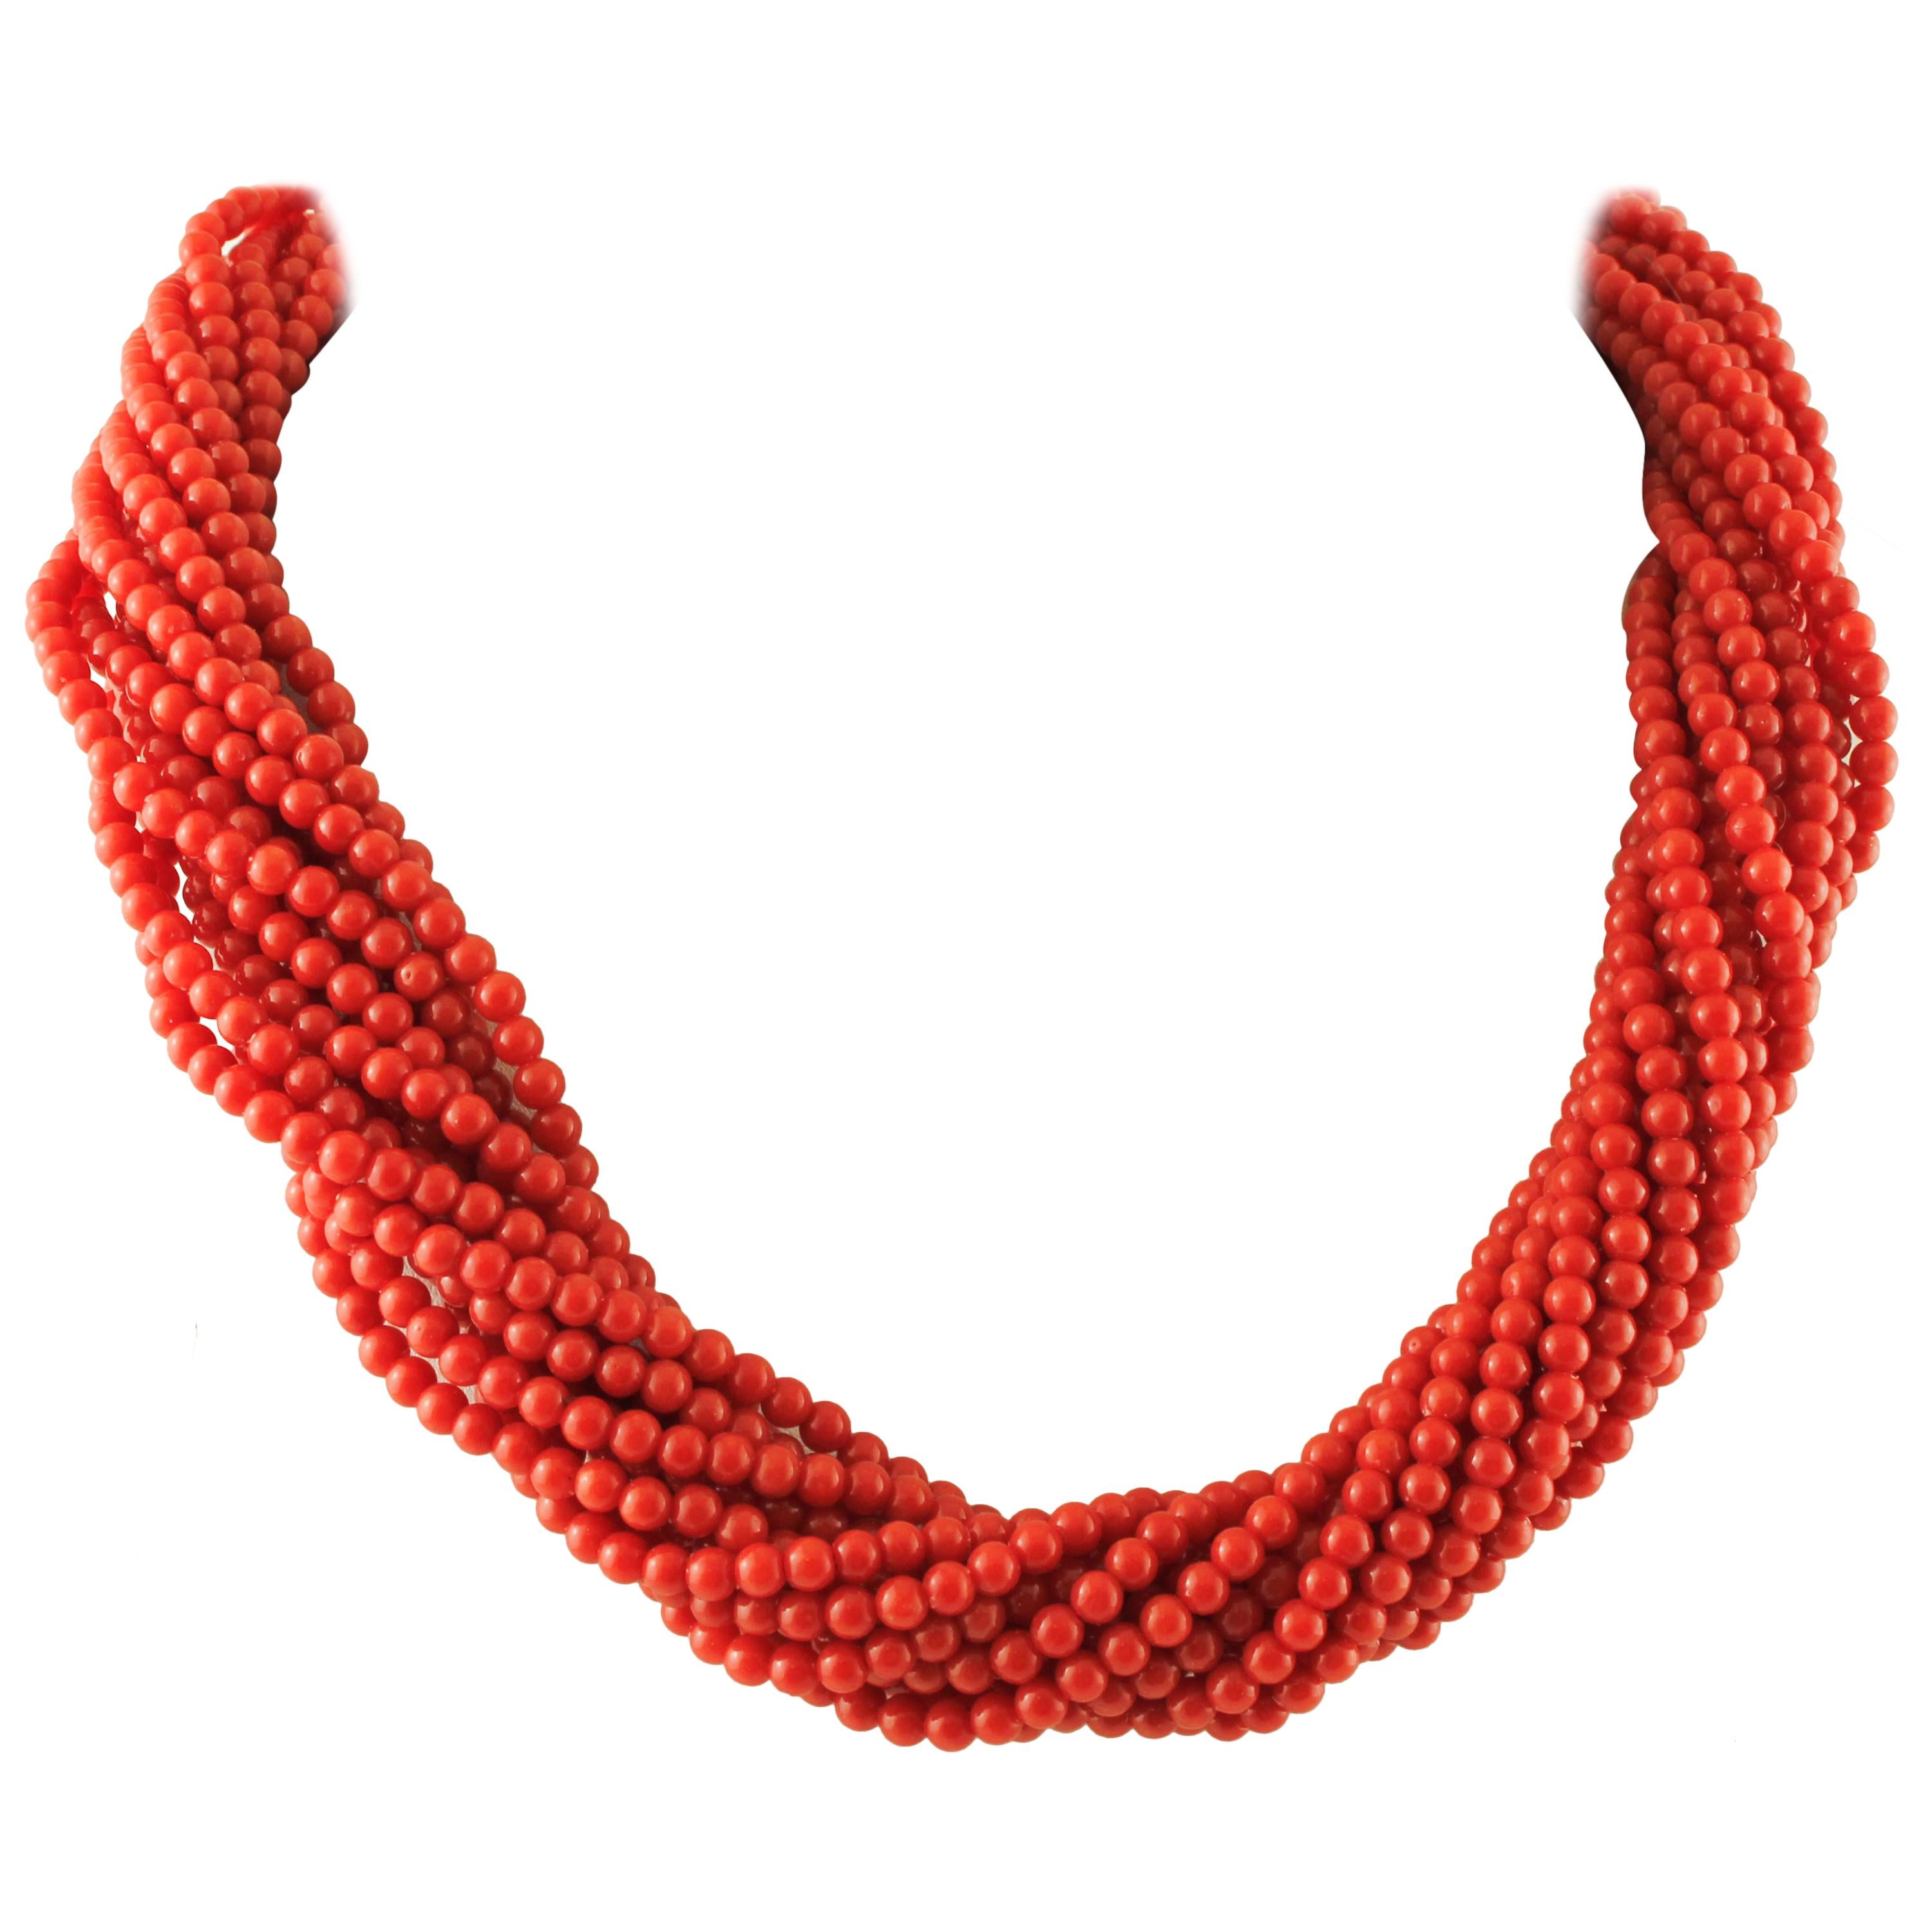 Intertwined Multi-Strands Red Beaded Coral Necklace 18K Yellow Gold Closure